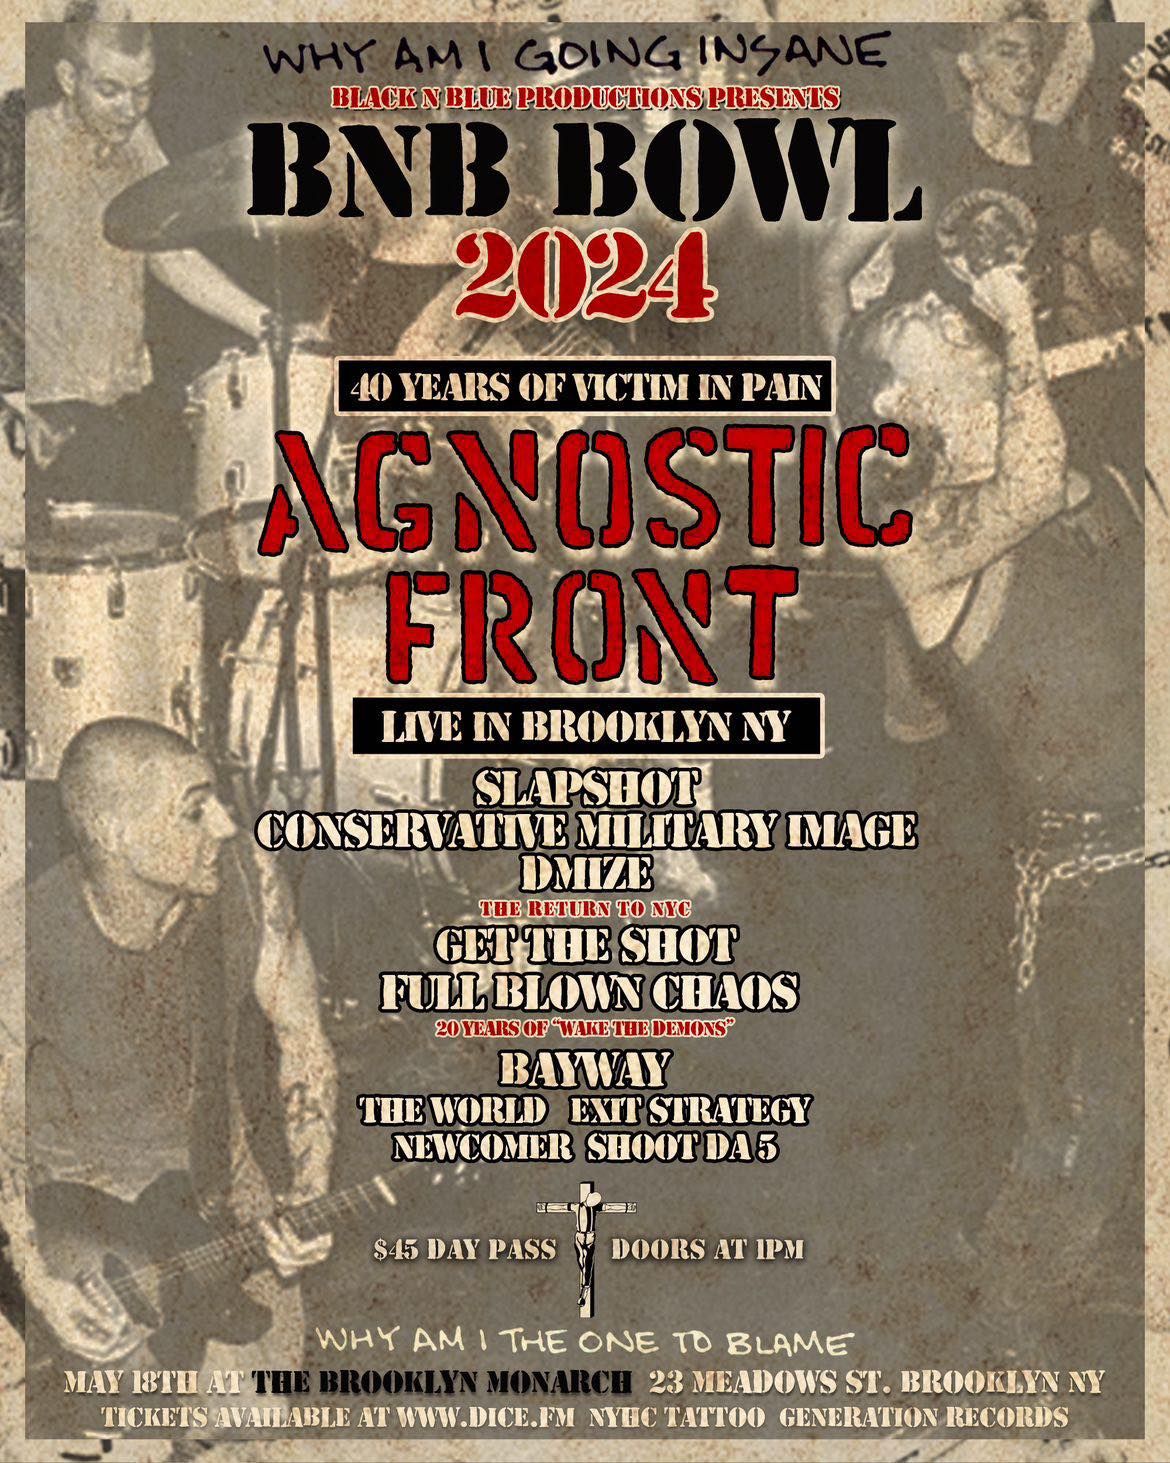 Black and Blue Bowl w\/ Agnostic Front (40 YEARS OF VICTIM IN PAIN)